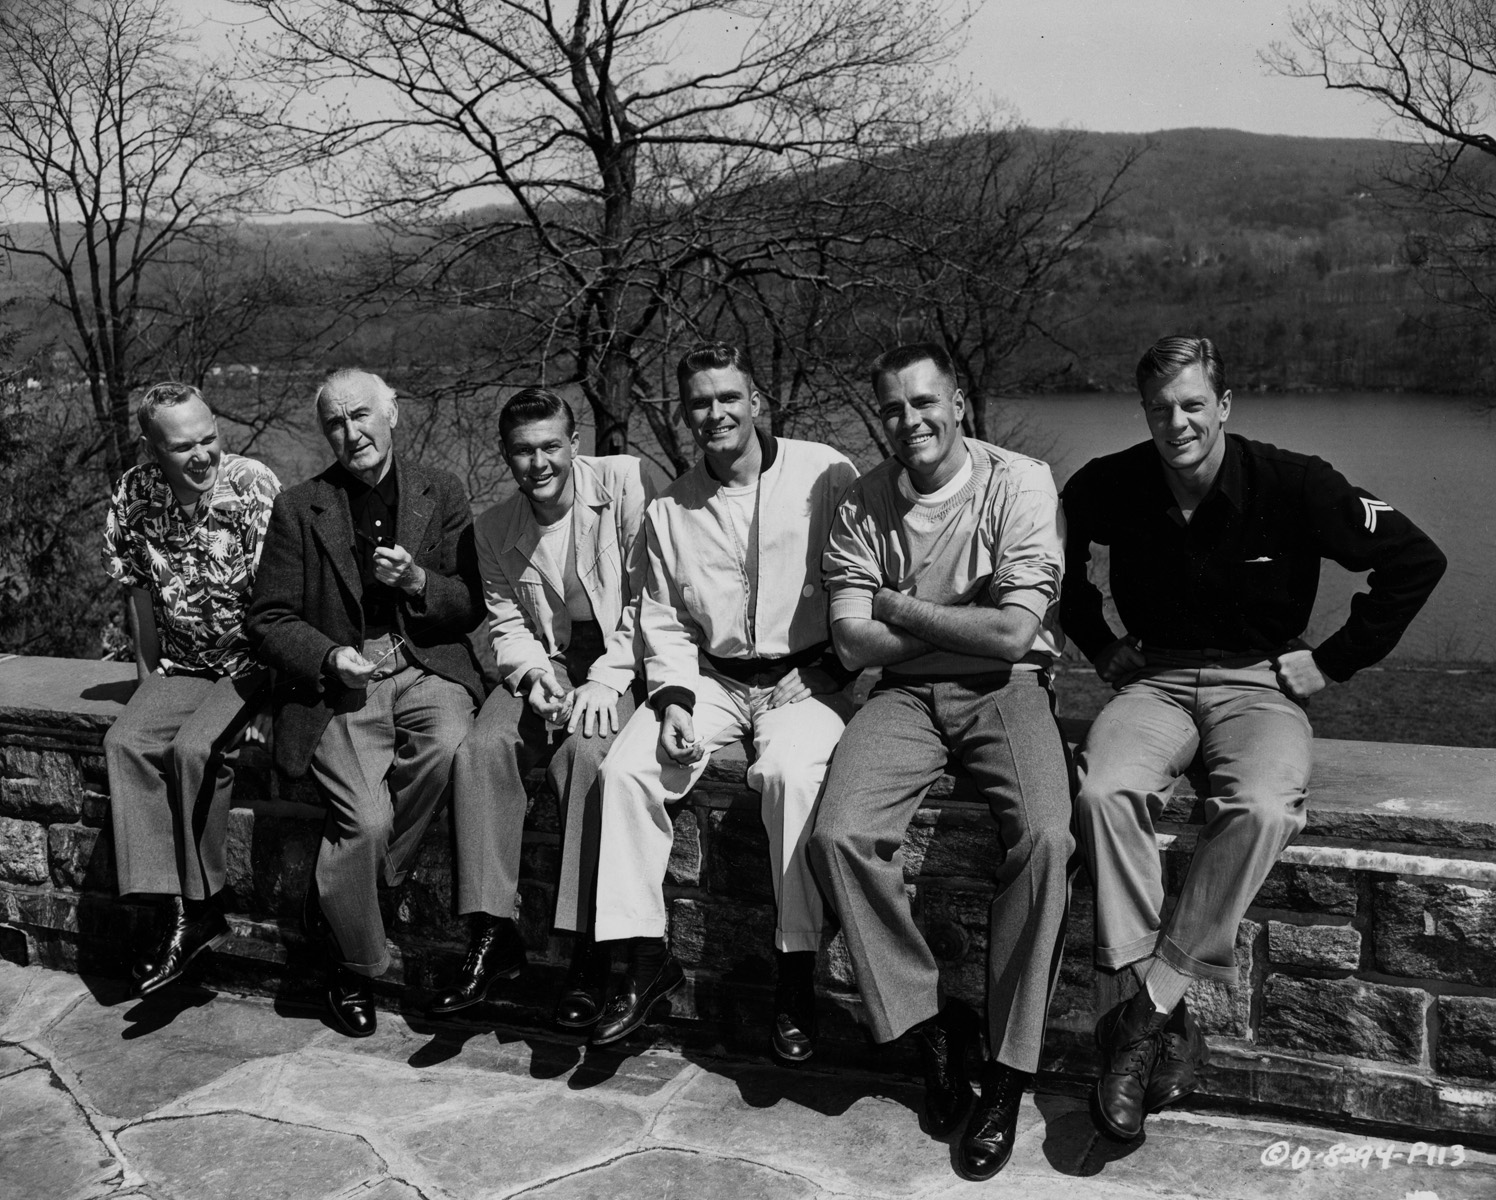  Publicity Photo, Columbia Pictures, West Point, 1954  “…HOLLYWOOD GROUP - Harry Carey, Jr., Donald Crisp, Martin Milner, Bill Leslie, Phil Carey and Peter Graves pose for the photographer against a Hudson River background while on  location….” 